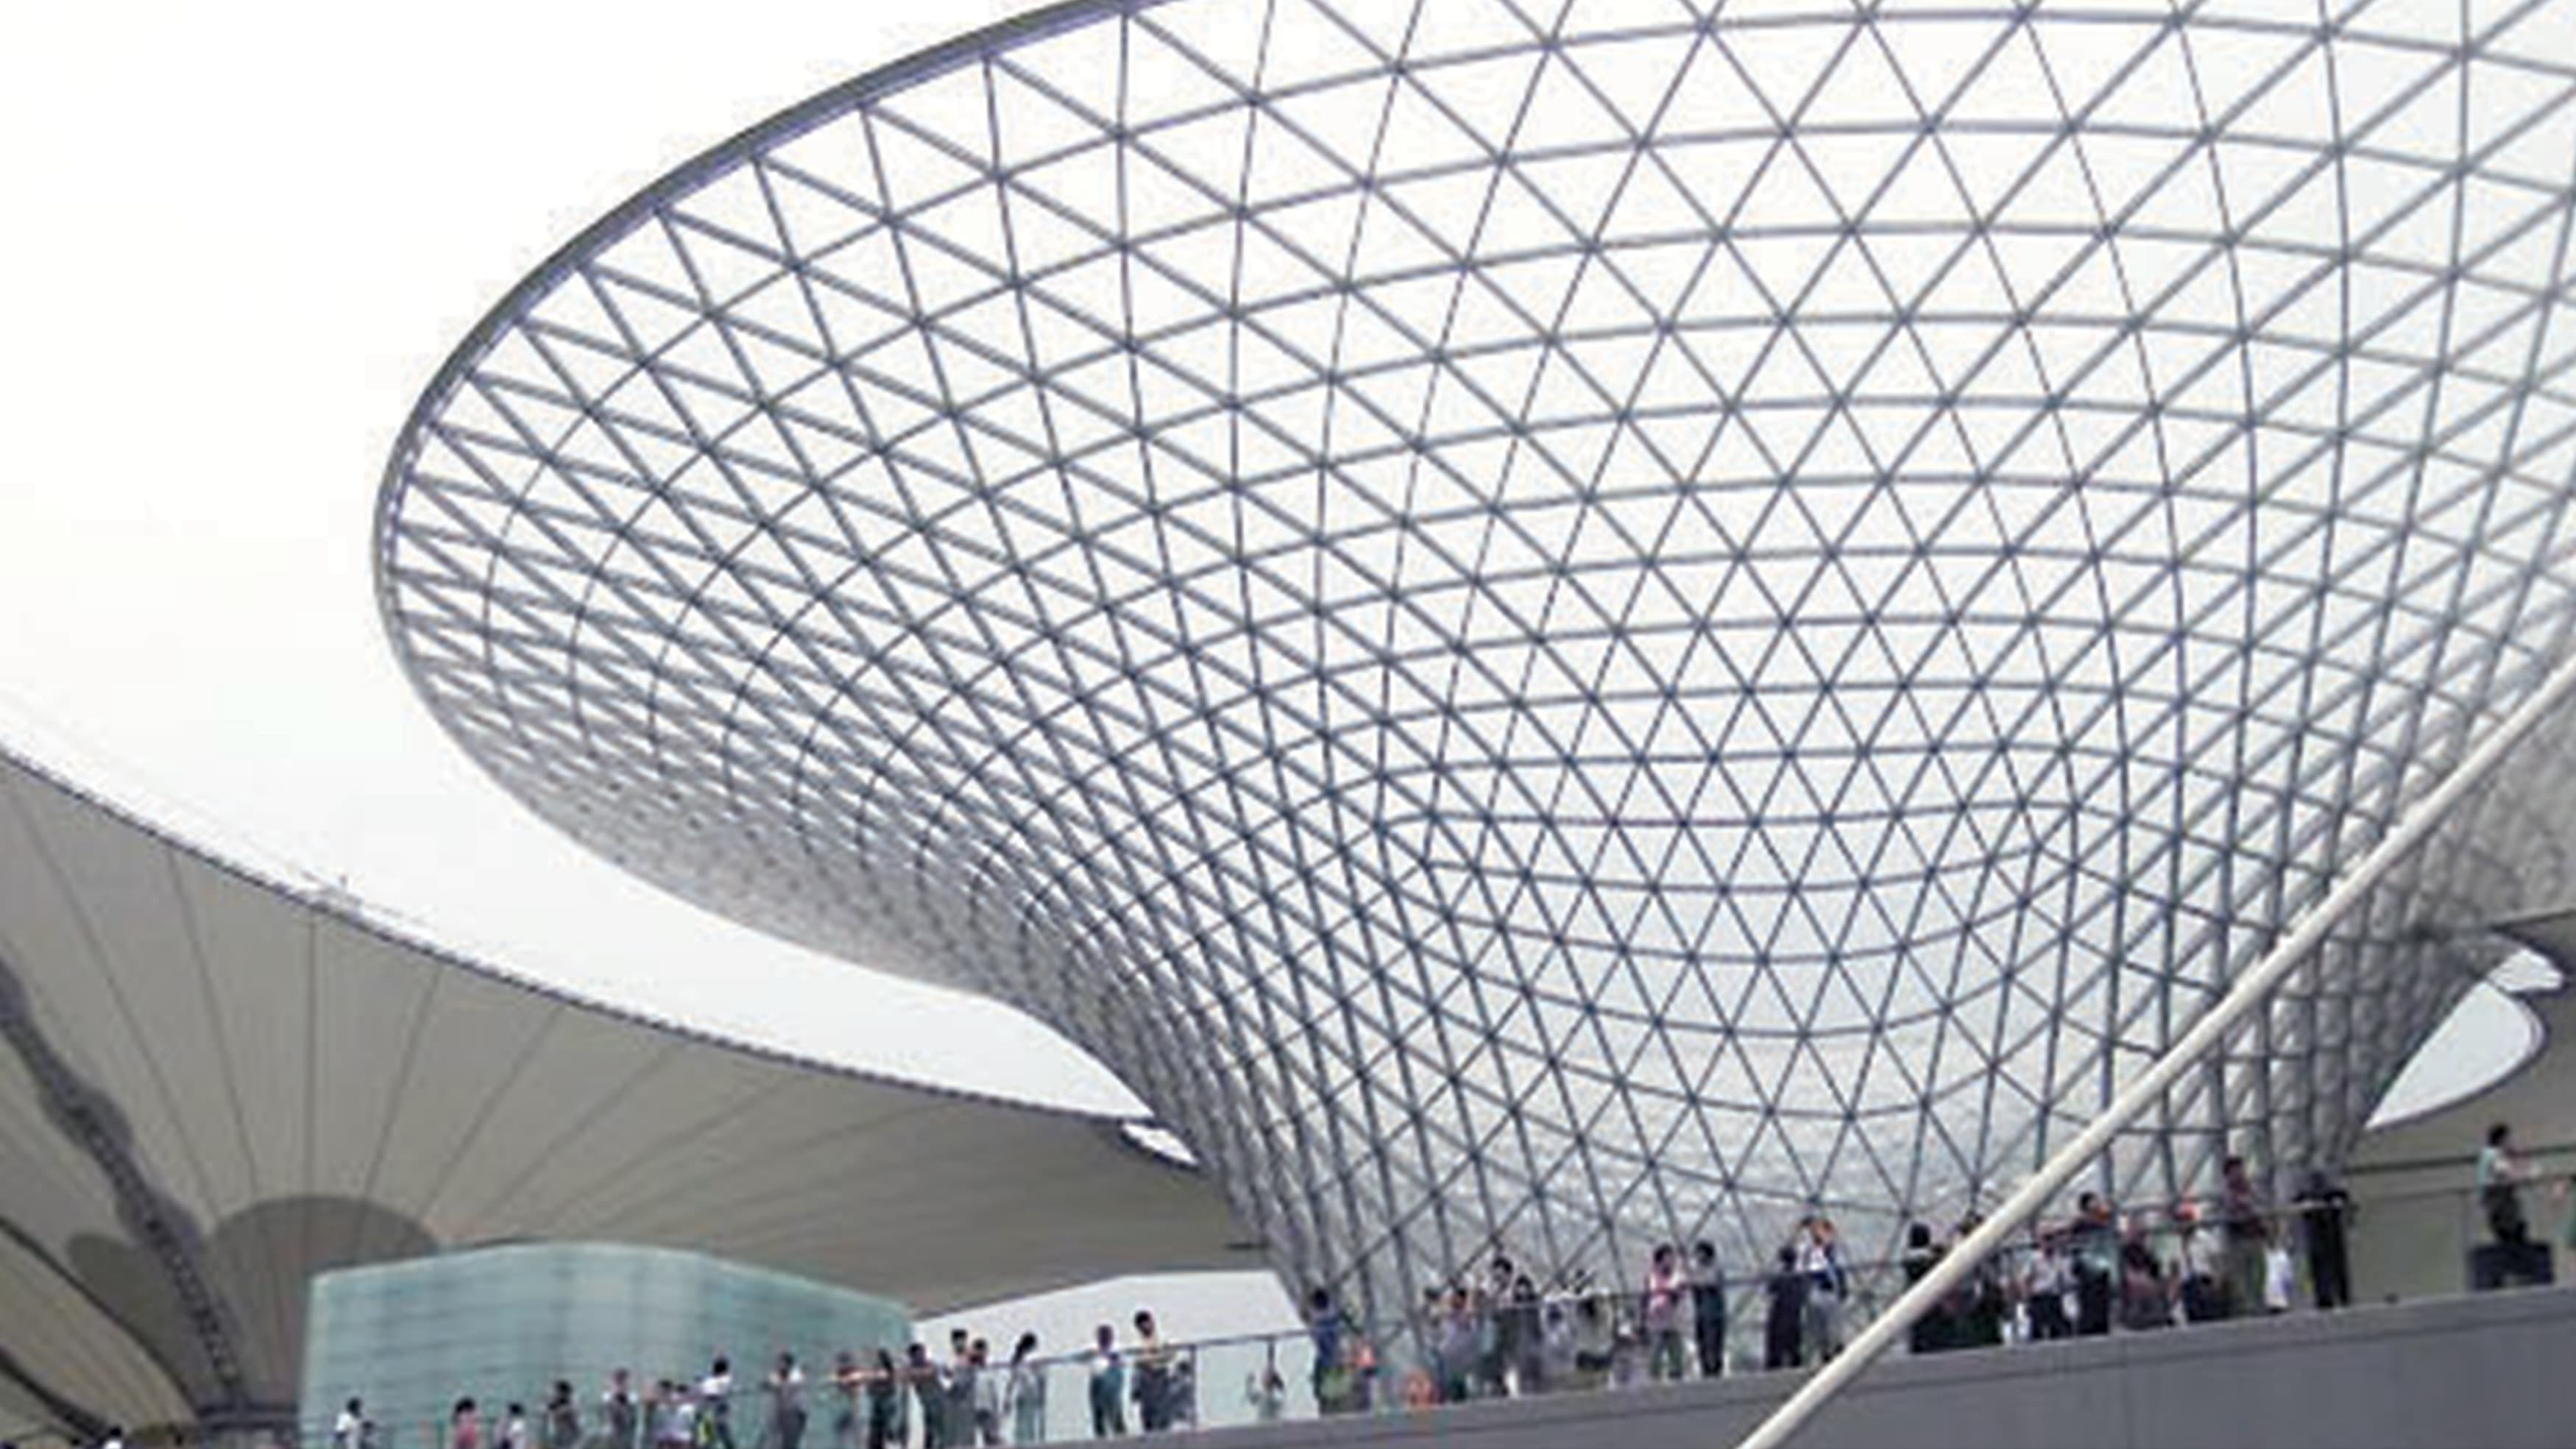 Various images from RSM Design's visit to Shanghai for the World Expo